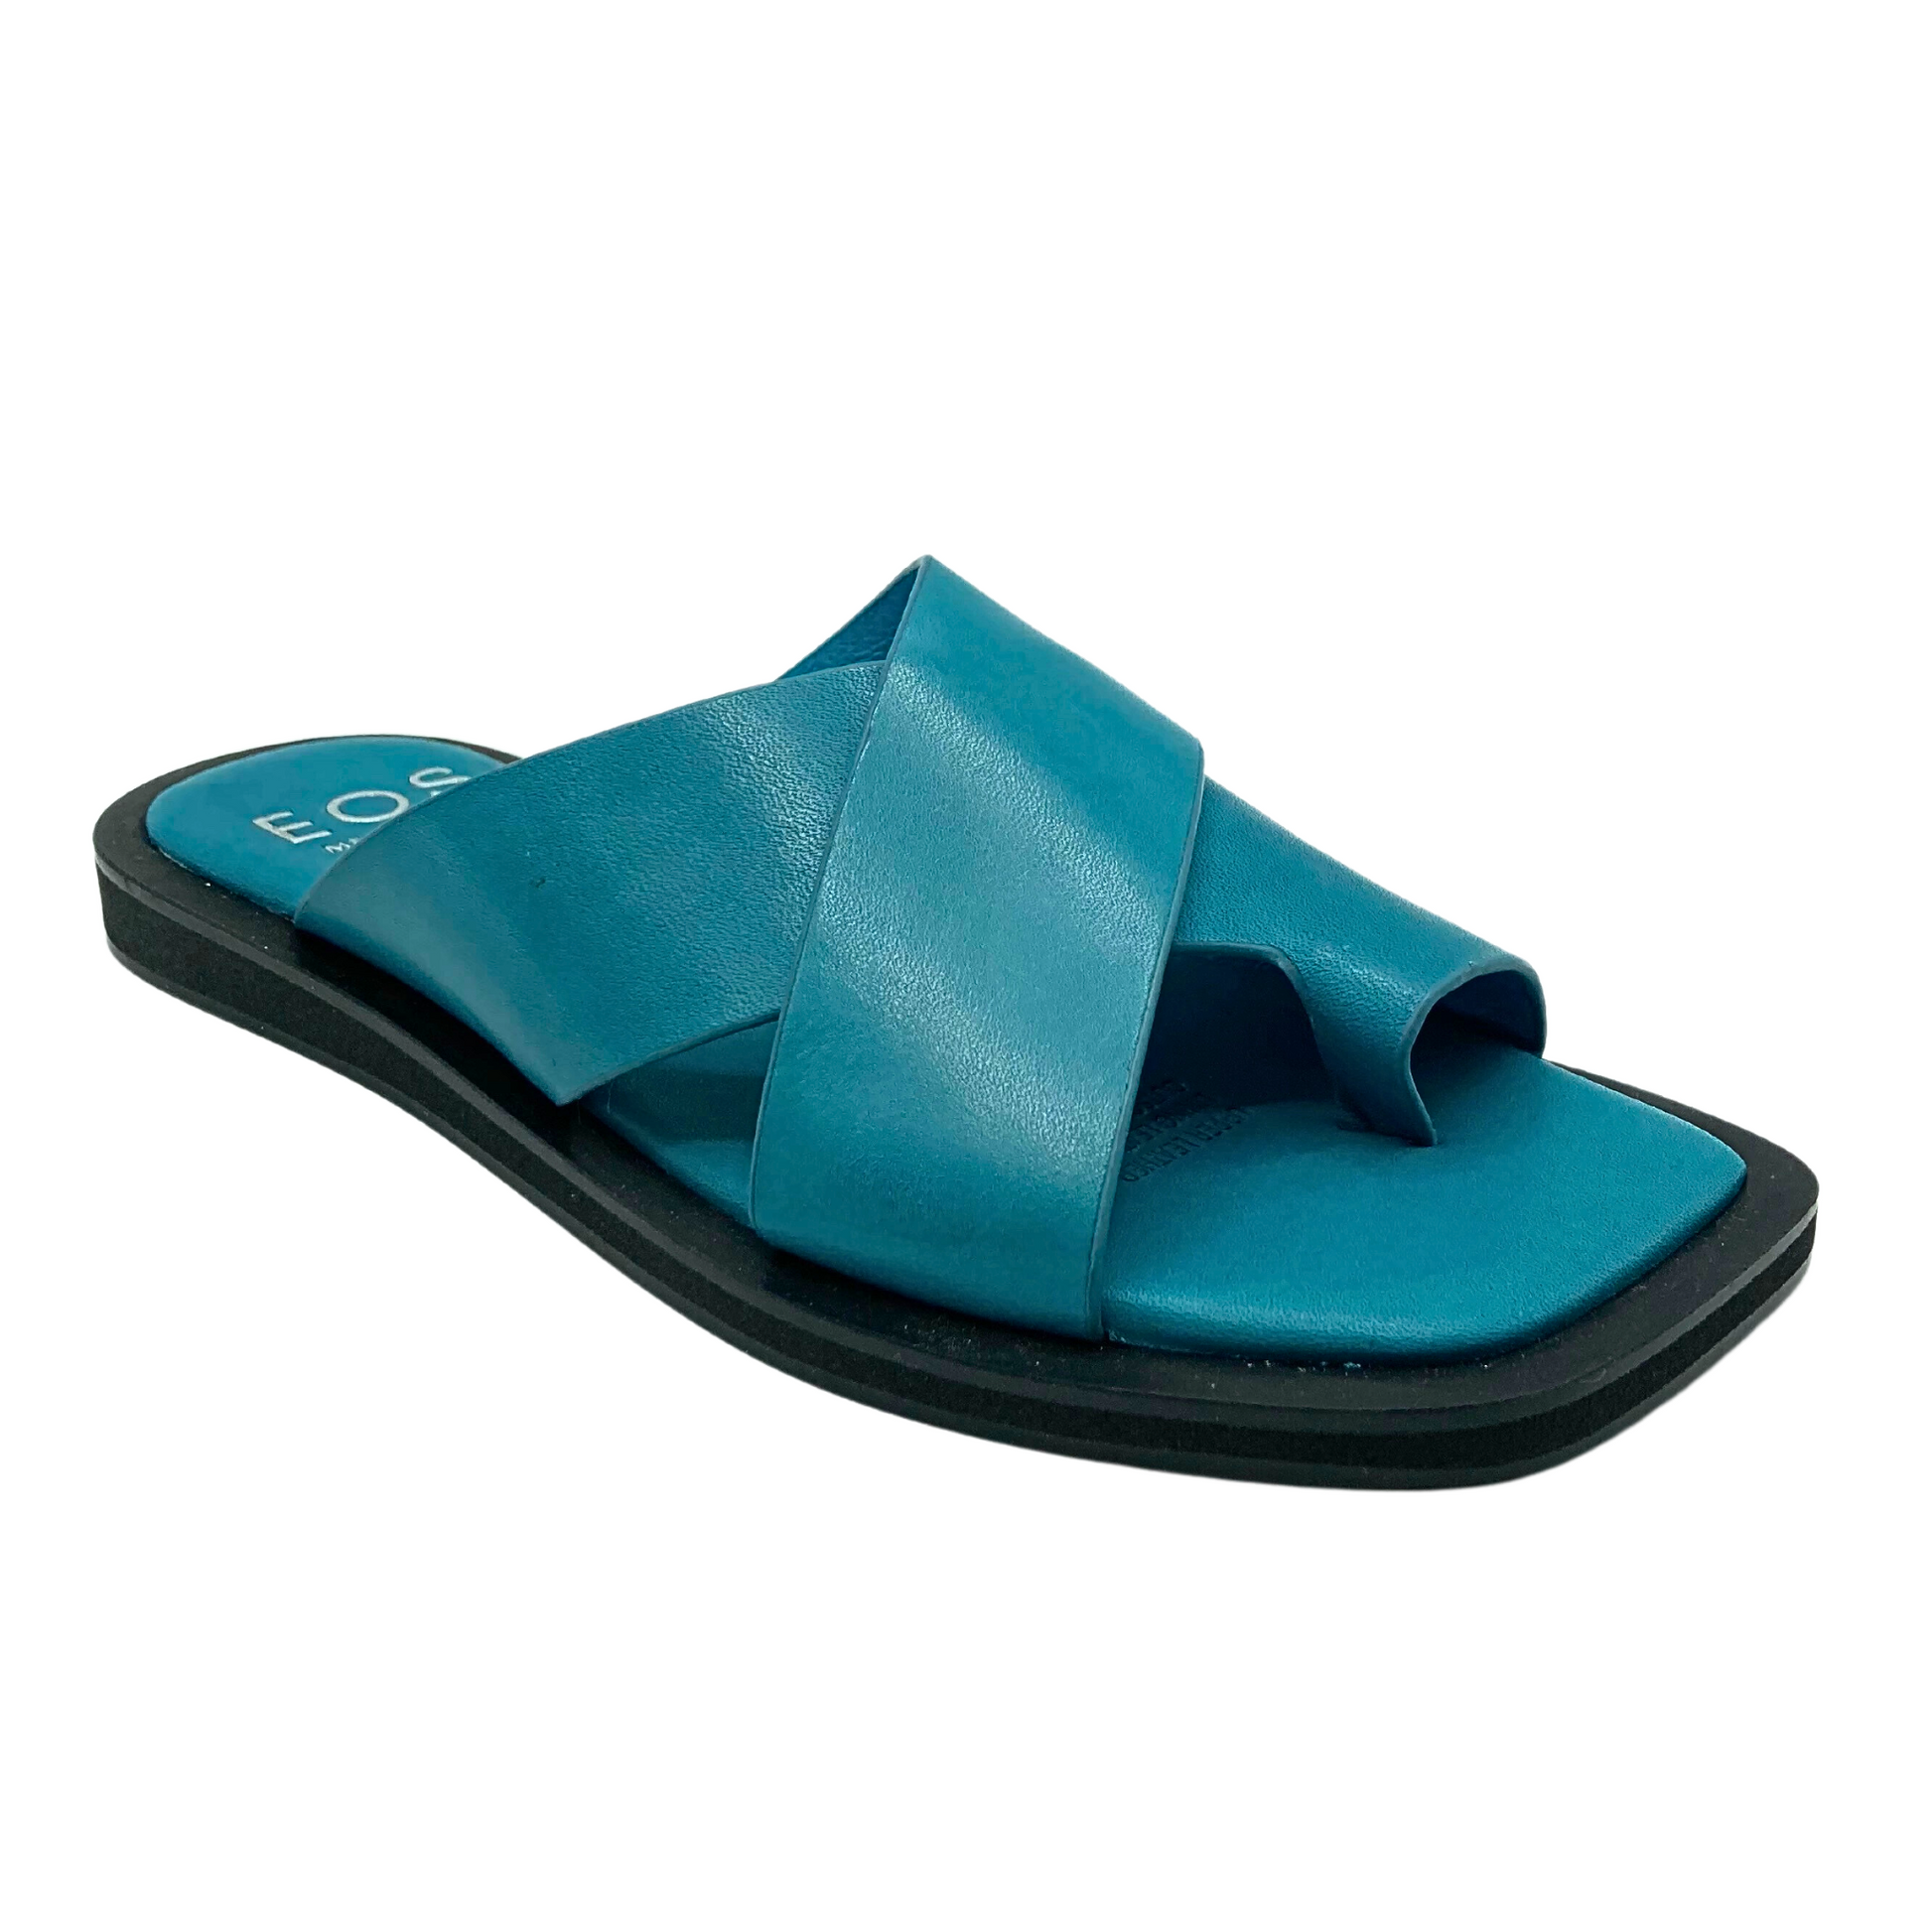 Angled side view of a blue sandal.  Flat with a black sole.  Cross straps and toe loop